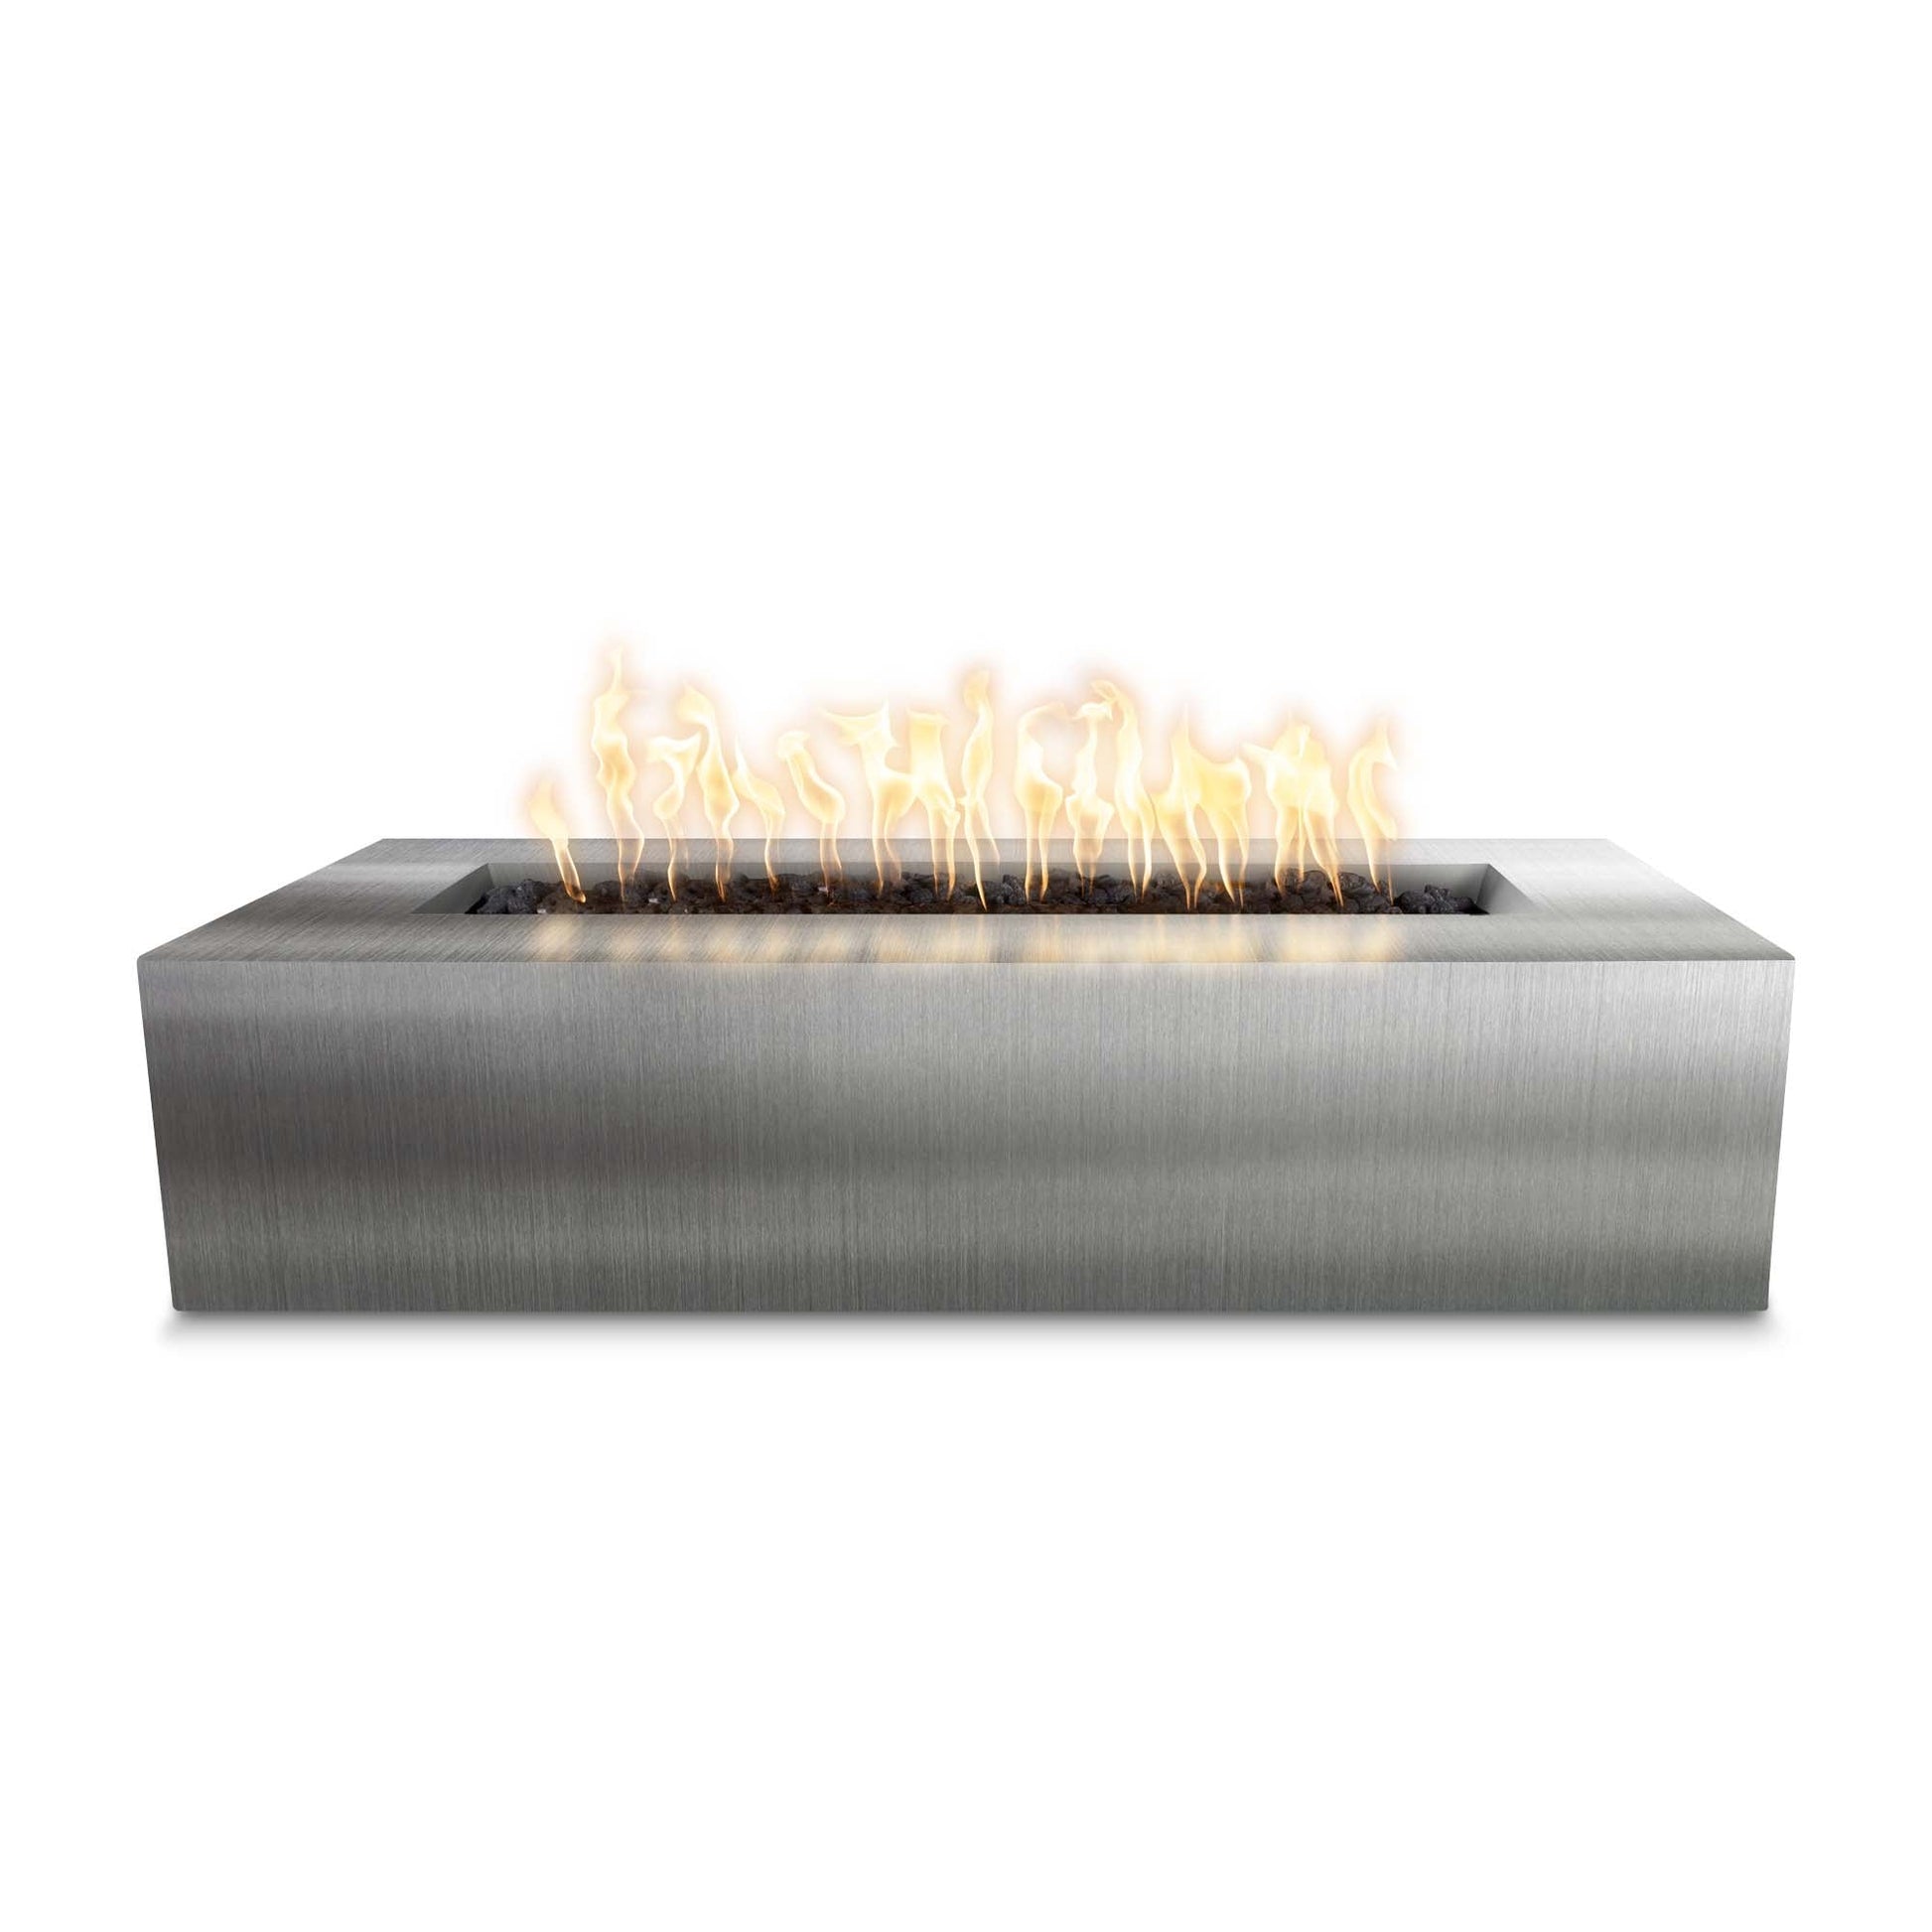 The Outdoor Plus Rectangular Regal 54" Hammered Copper Natural Gas Fire Pit with 110V Electronic Ignition